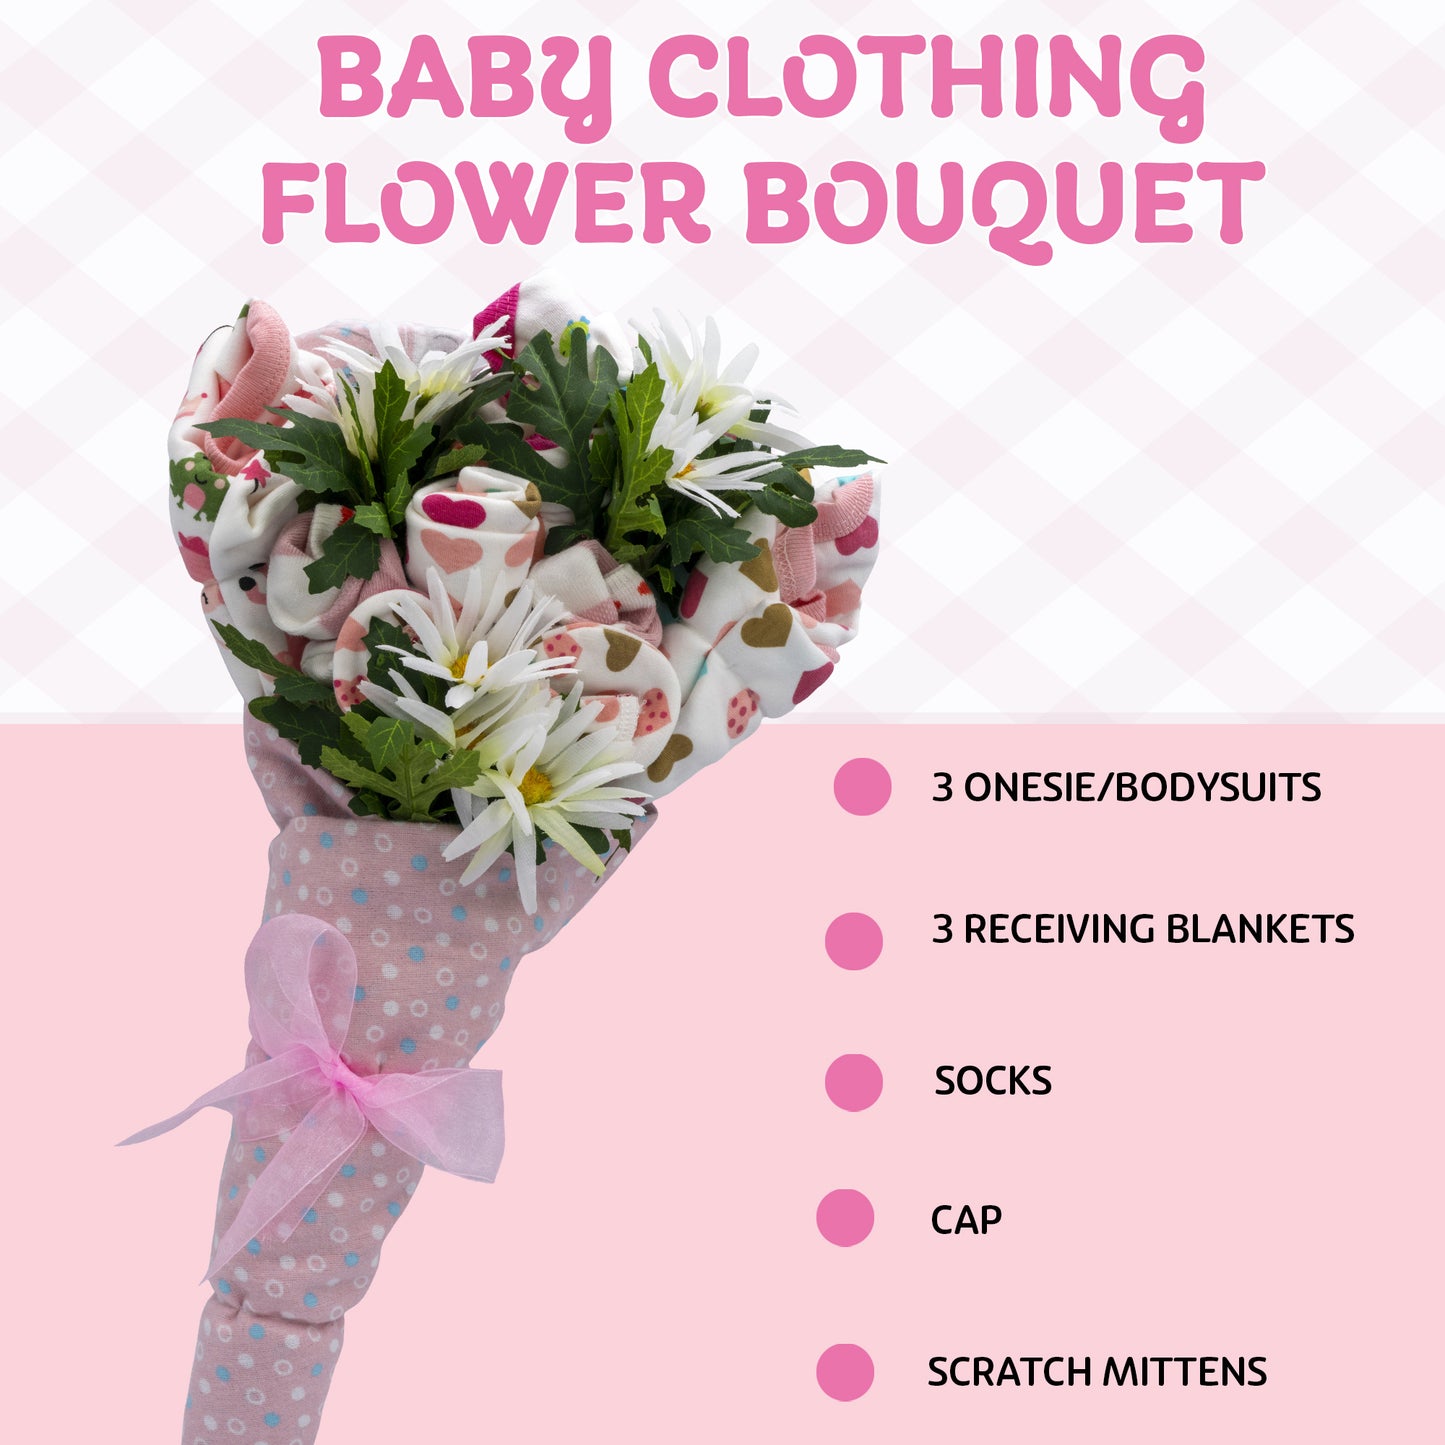 Baby Blossom Clothing Flower Bouquet, New Baby Girl Gift With Baby Clothing Arranged Like Celebration Flowers, Creative Unique Baby Gift For New Parents